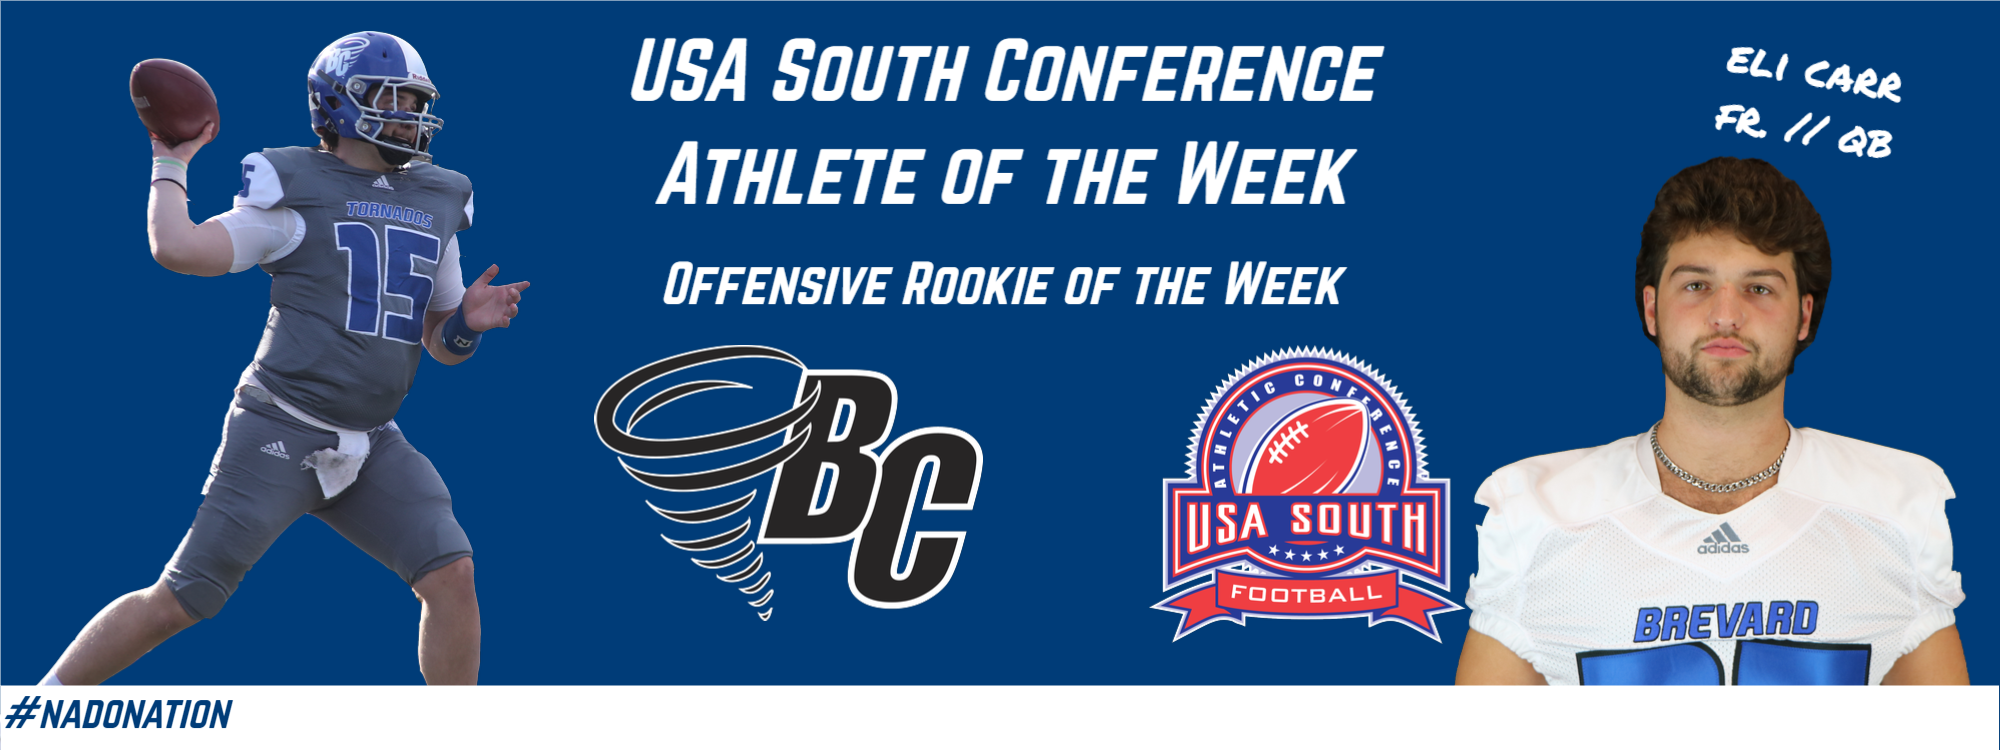 Eli Carr Named USA South Offensive Rookie of the Week Following Collegiate Debut